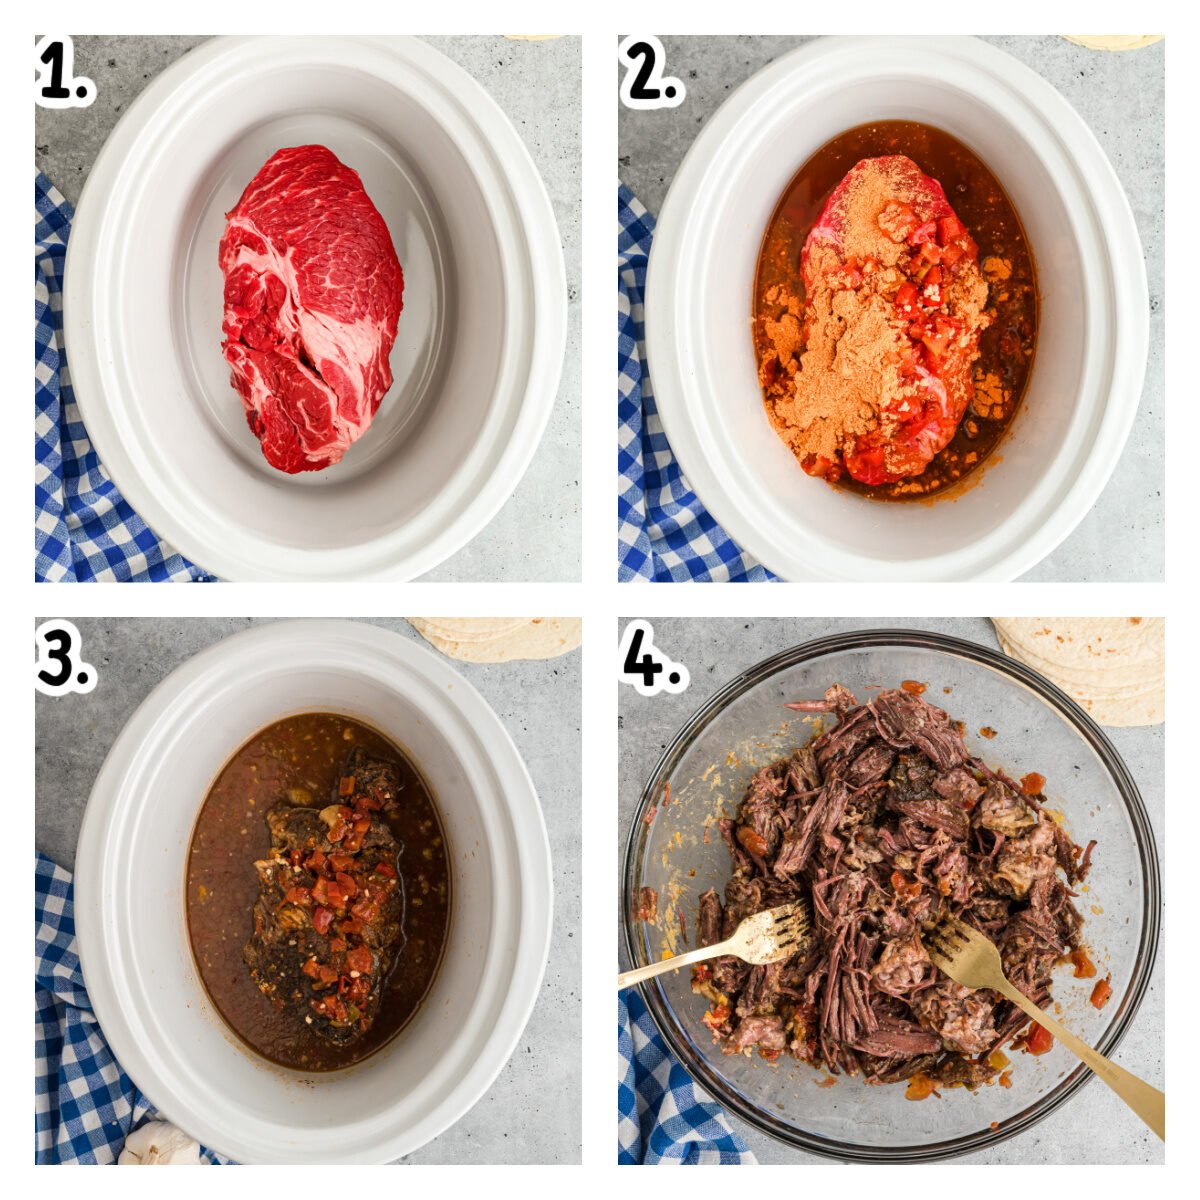 Four images showing how to make beef for chimichangas in a slow cooker.